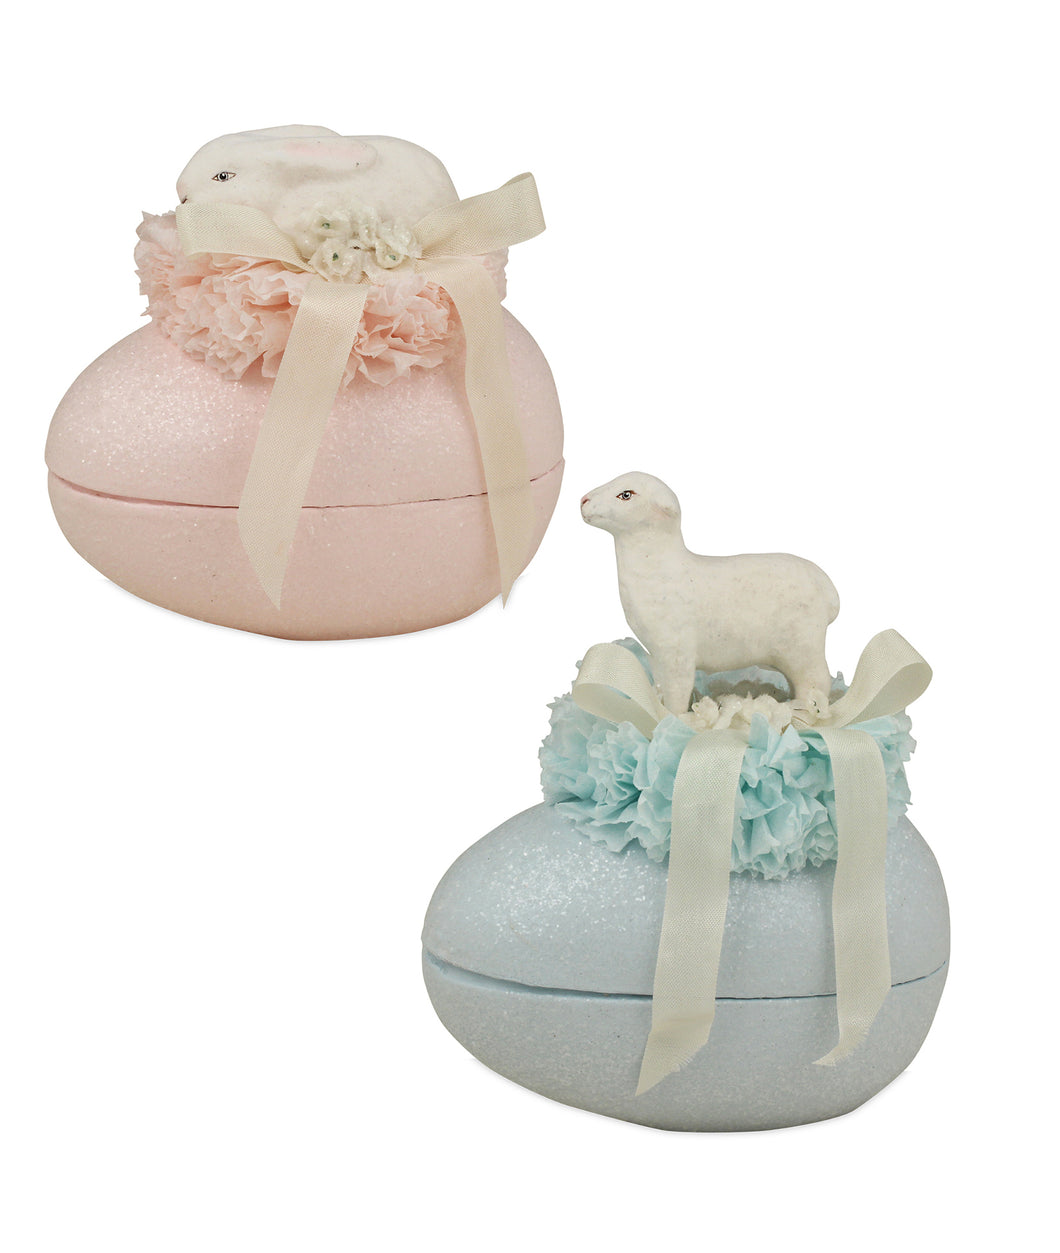 TP5240 - Bunny/Lamb on Egg Container (4782280048706)